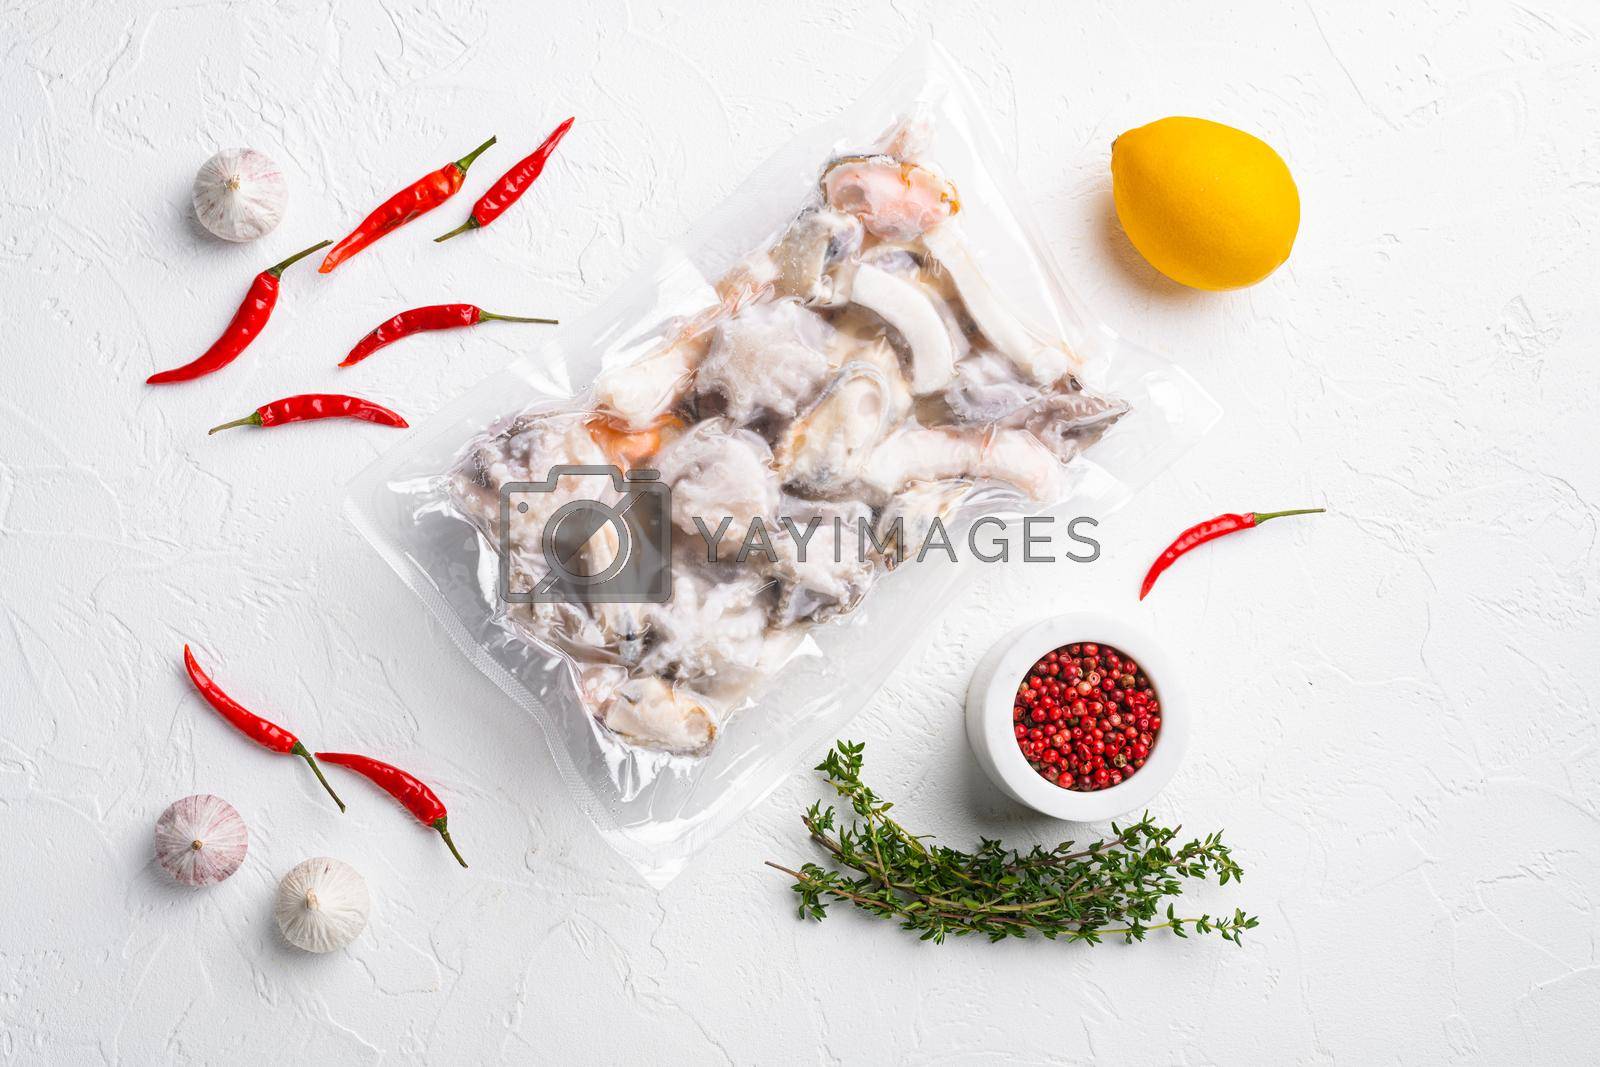 Royalty free image of Frozen seafood pack, on white stone table background, top view flat lay by Ilianesolenyi